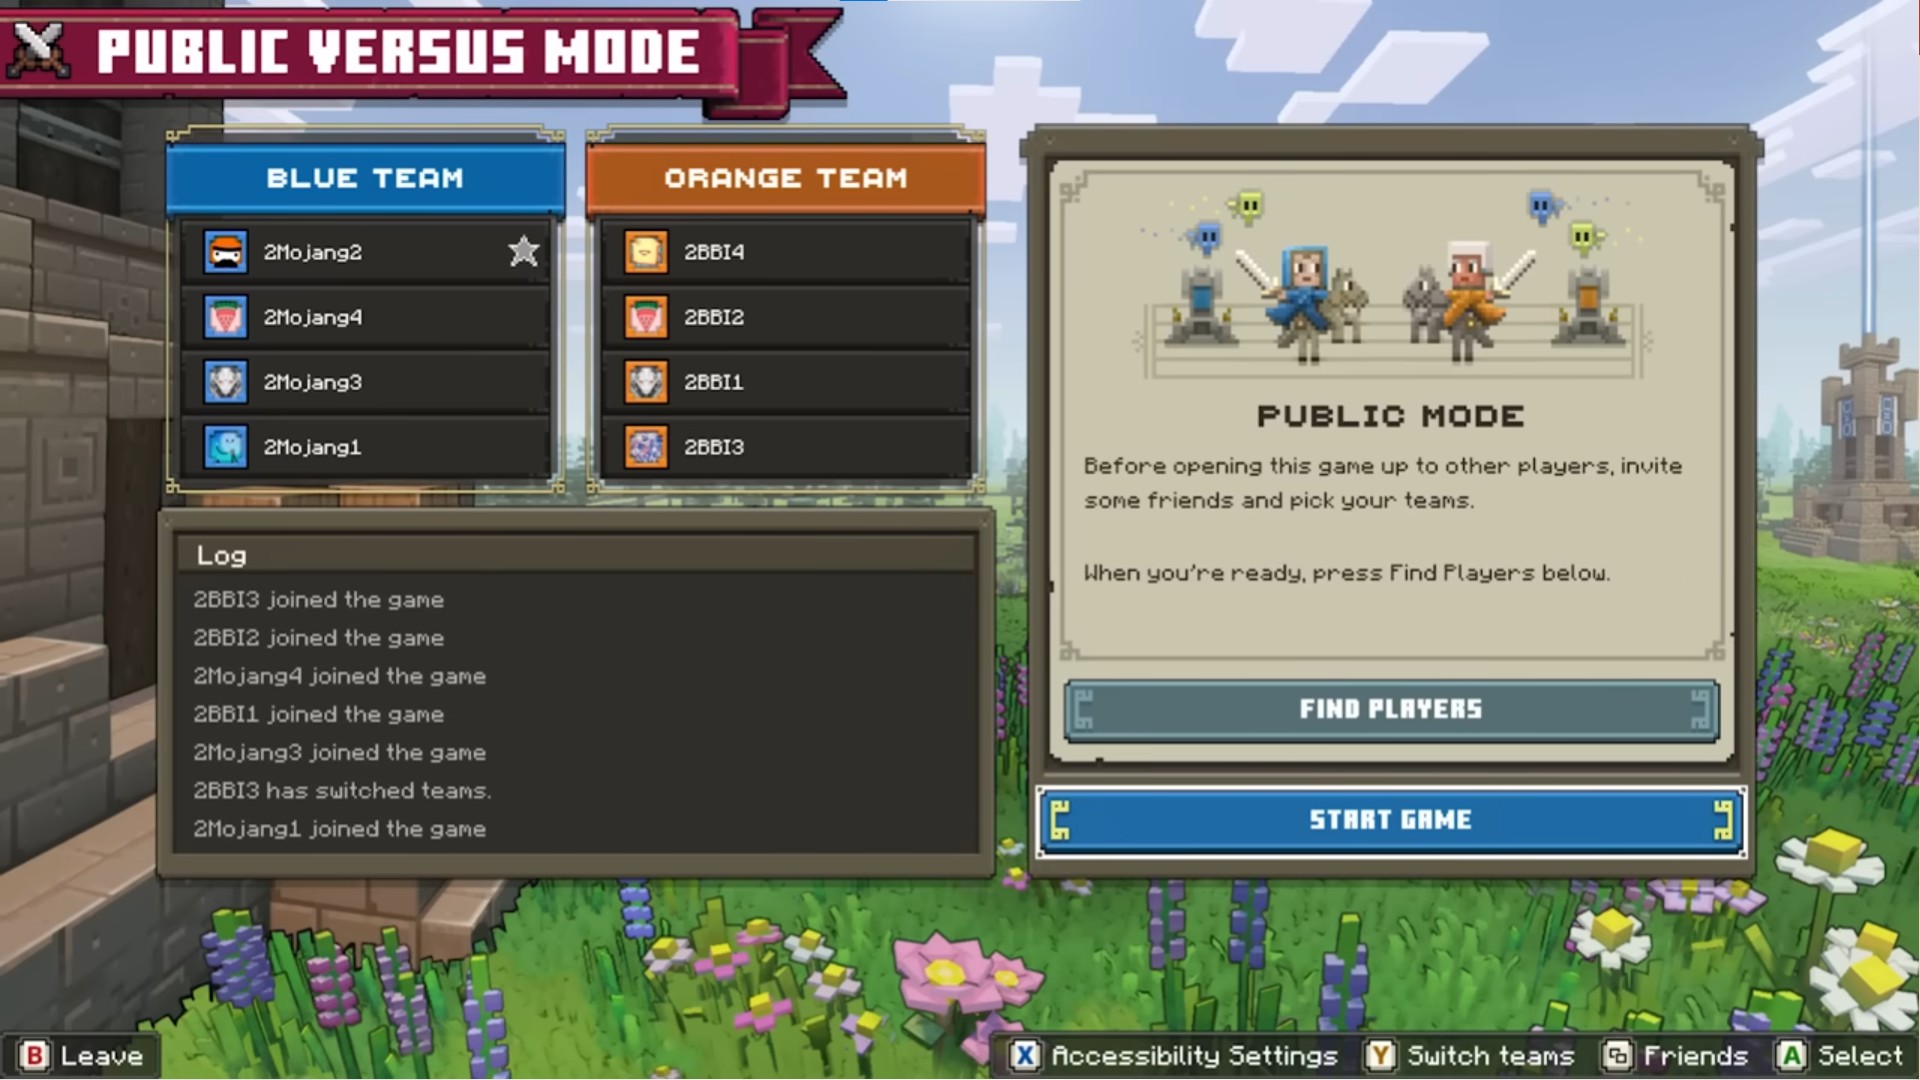 Does Minecraft Legends have co-op and multiplayer modes? - Meristation